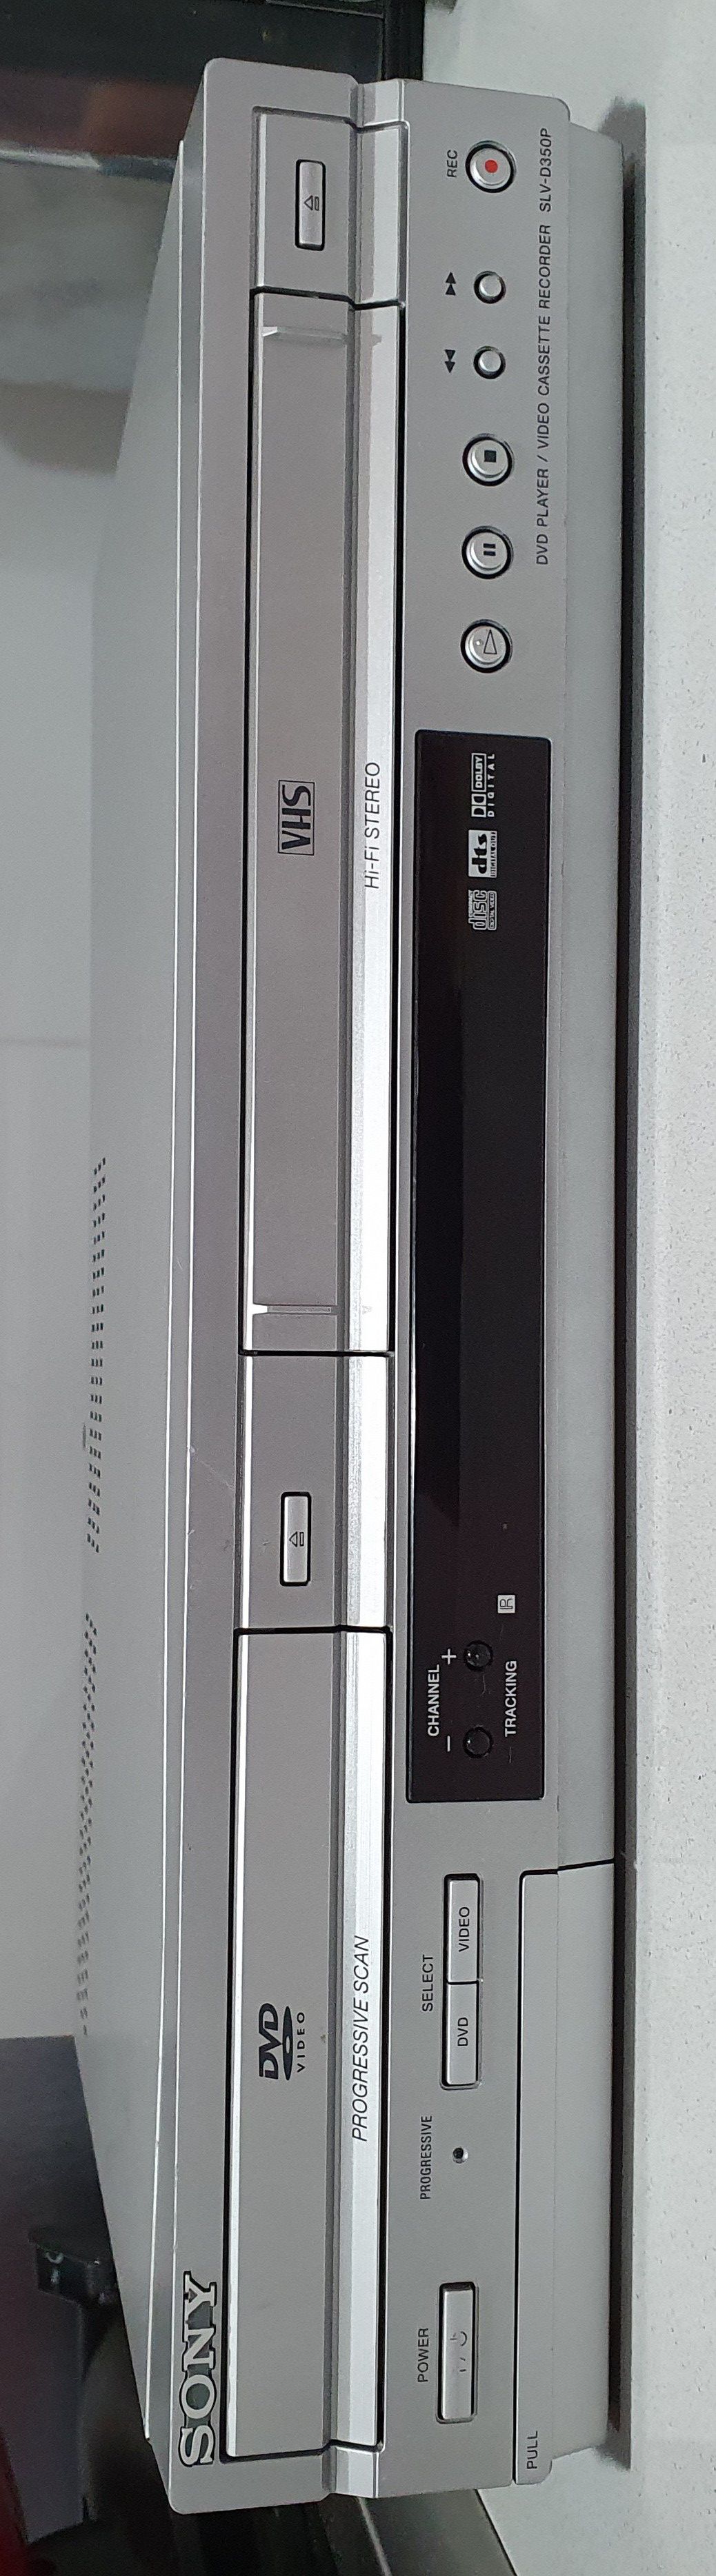 Sony DVD VCR Combo.